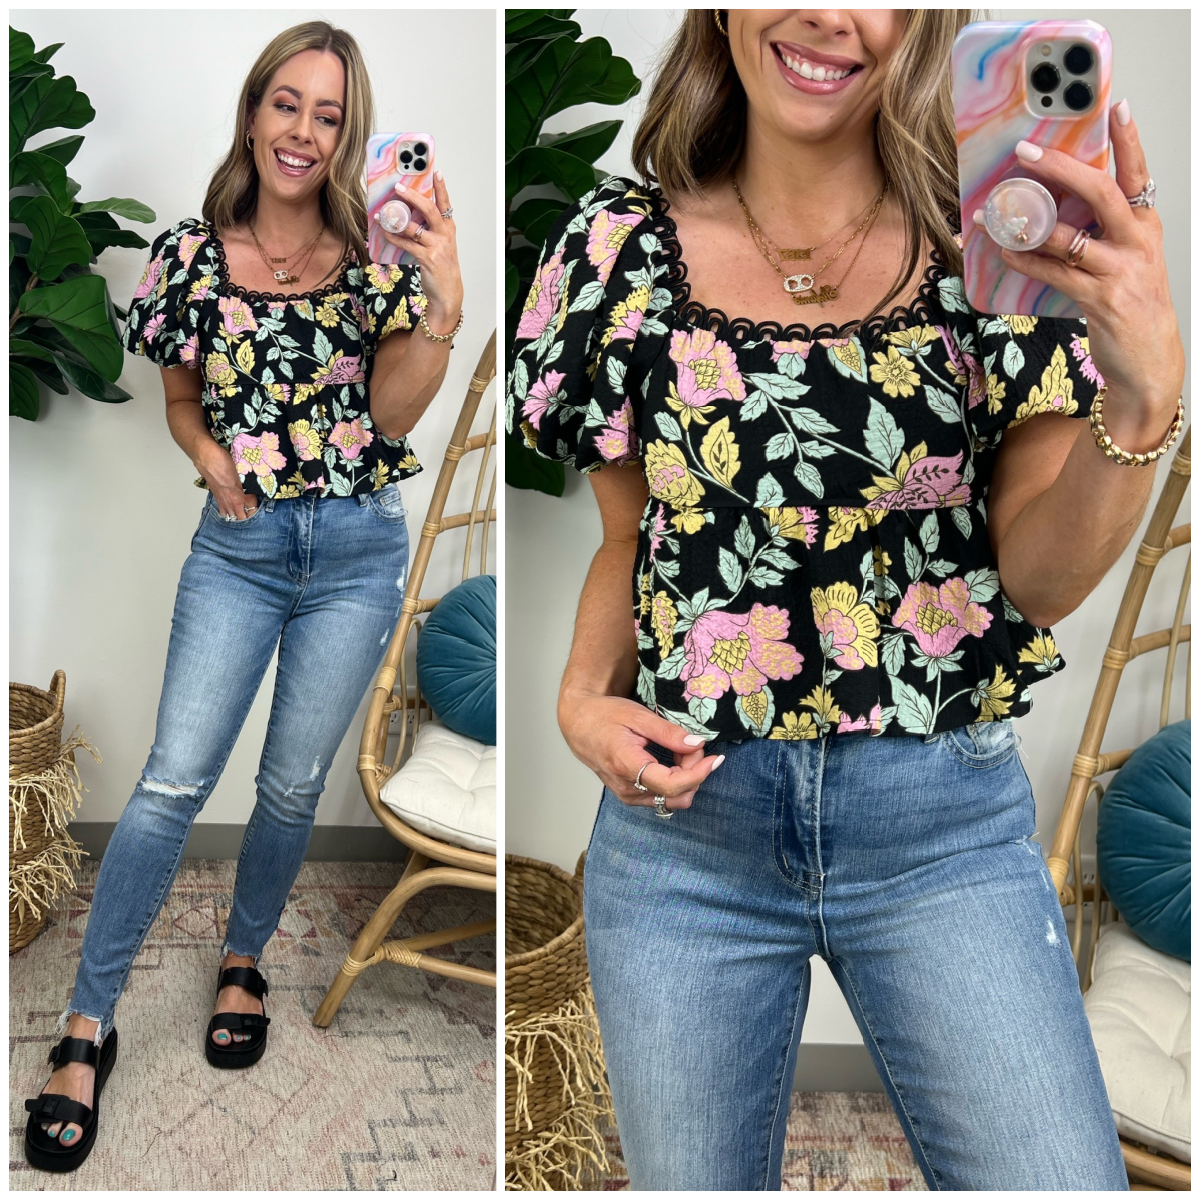  Mesmerized Beauty Floral Crochet Trim Top - FINAL SALE - Madison and Mallory